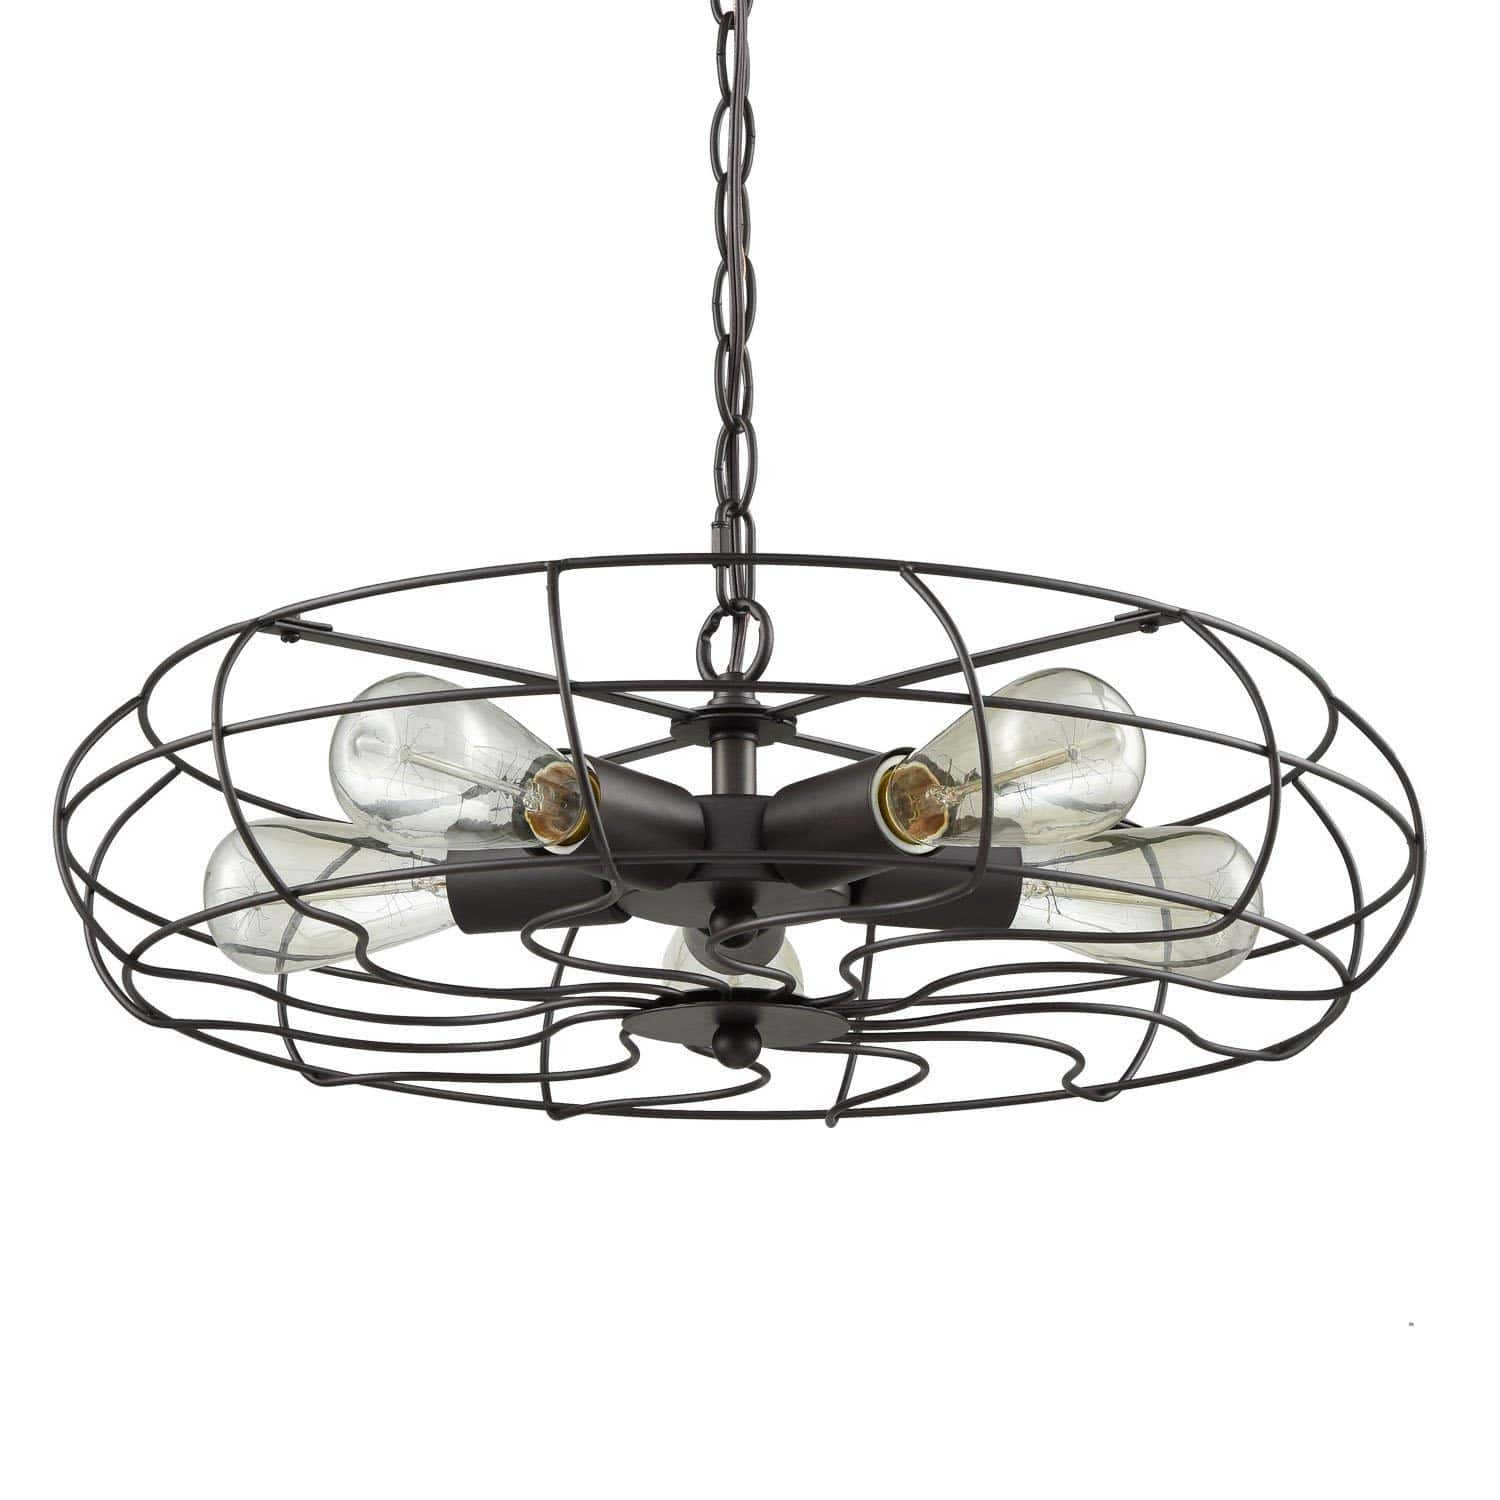 Industrial Metal Cage Hanging Pendant Chandelier with Chain, 5 Lights